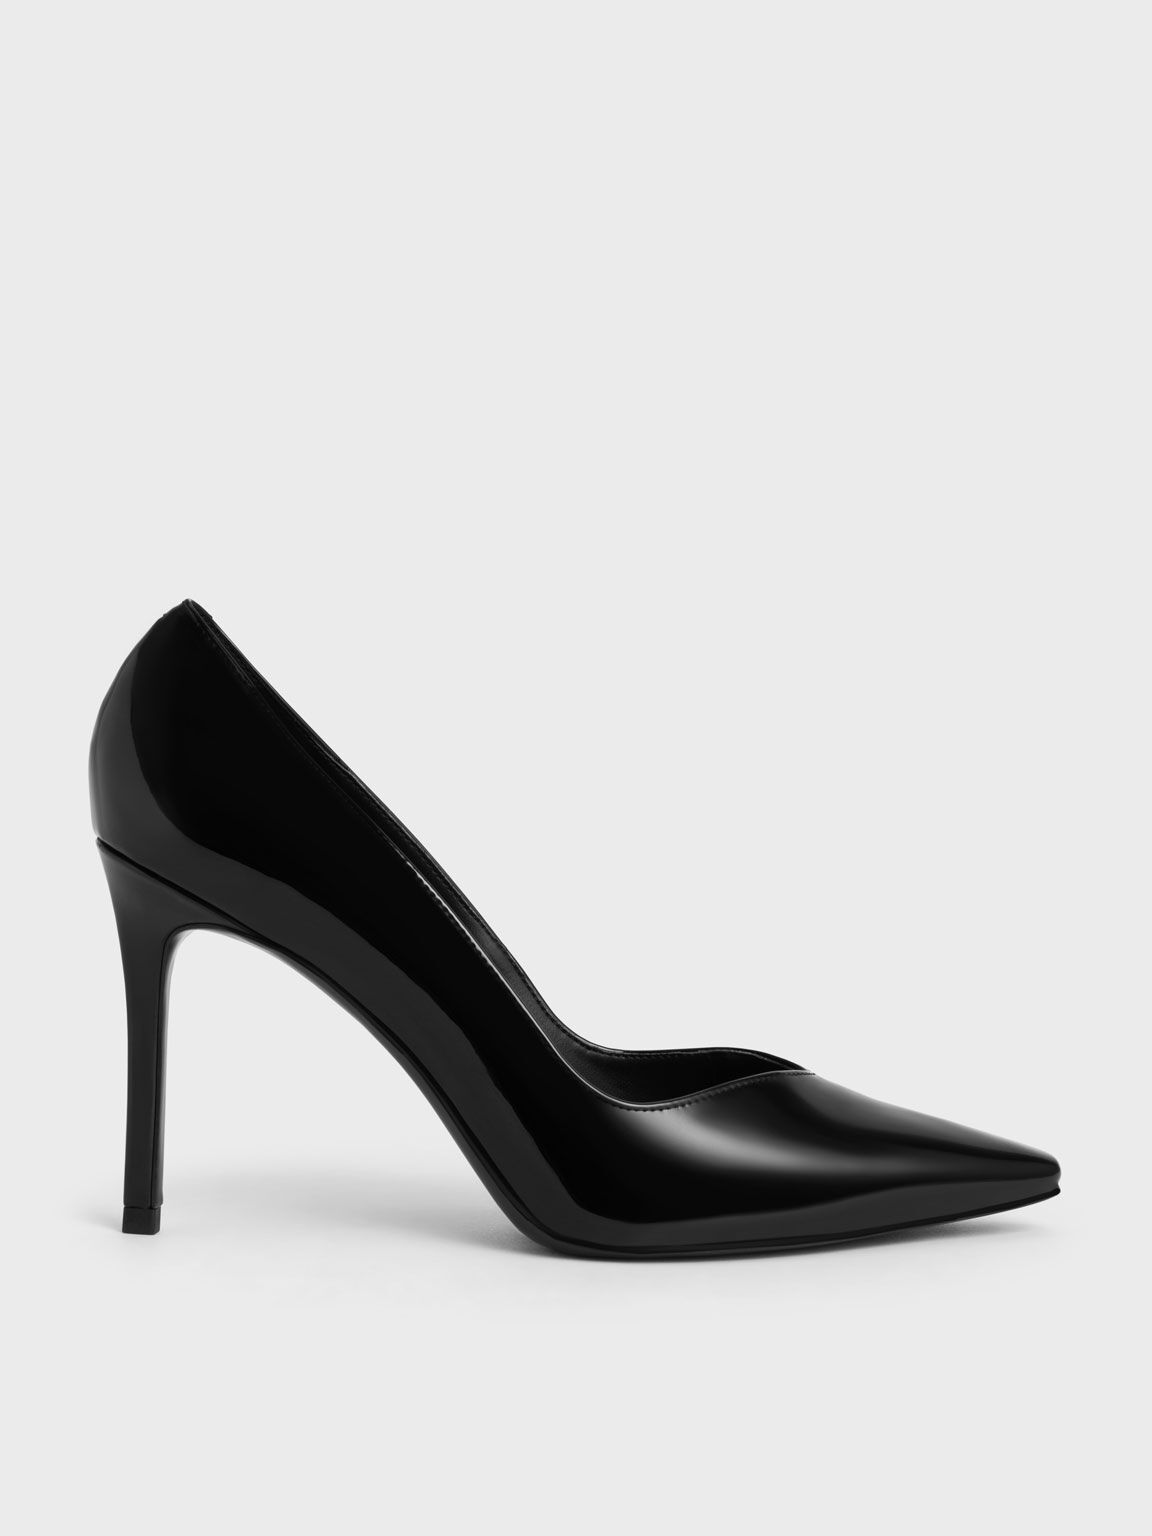 Black Patent Tapered Square-Toe Pumps - CHARLES & KEITH US